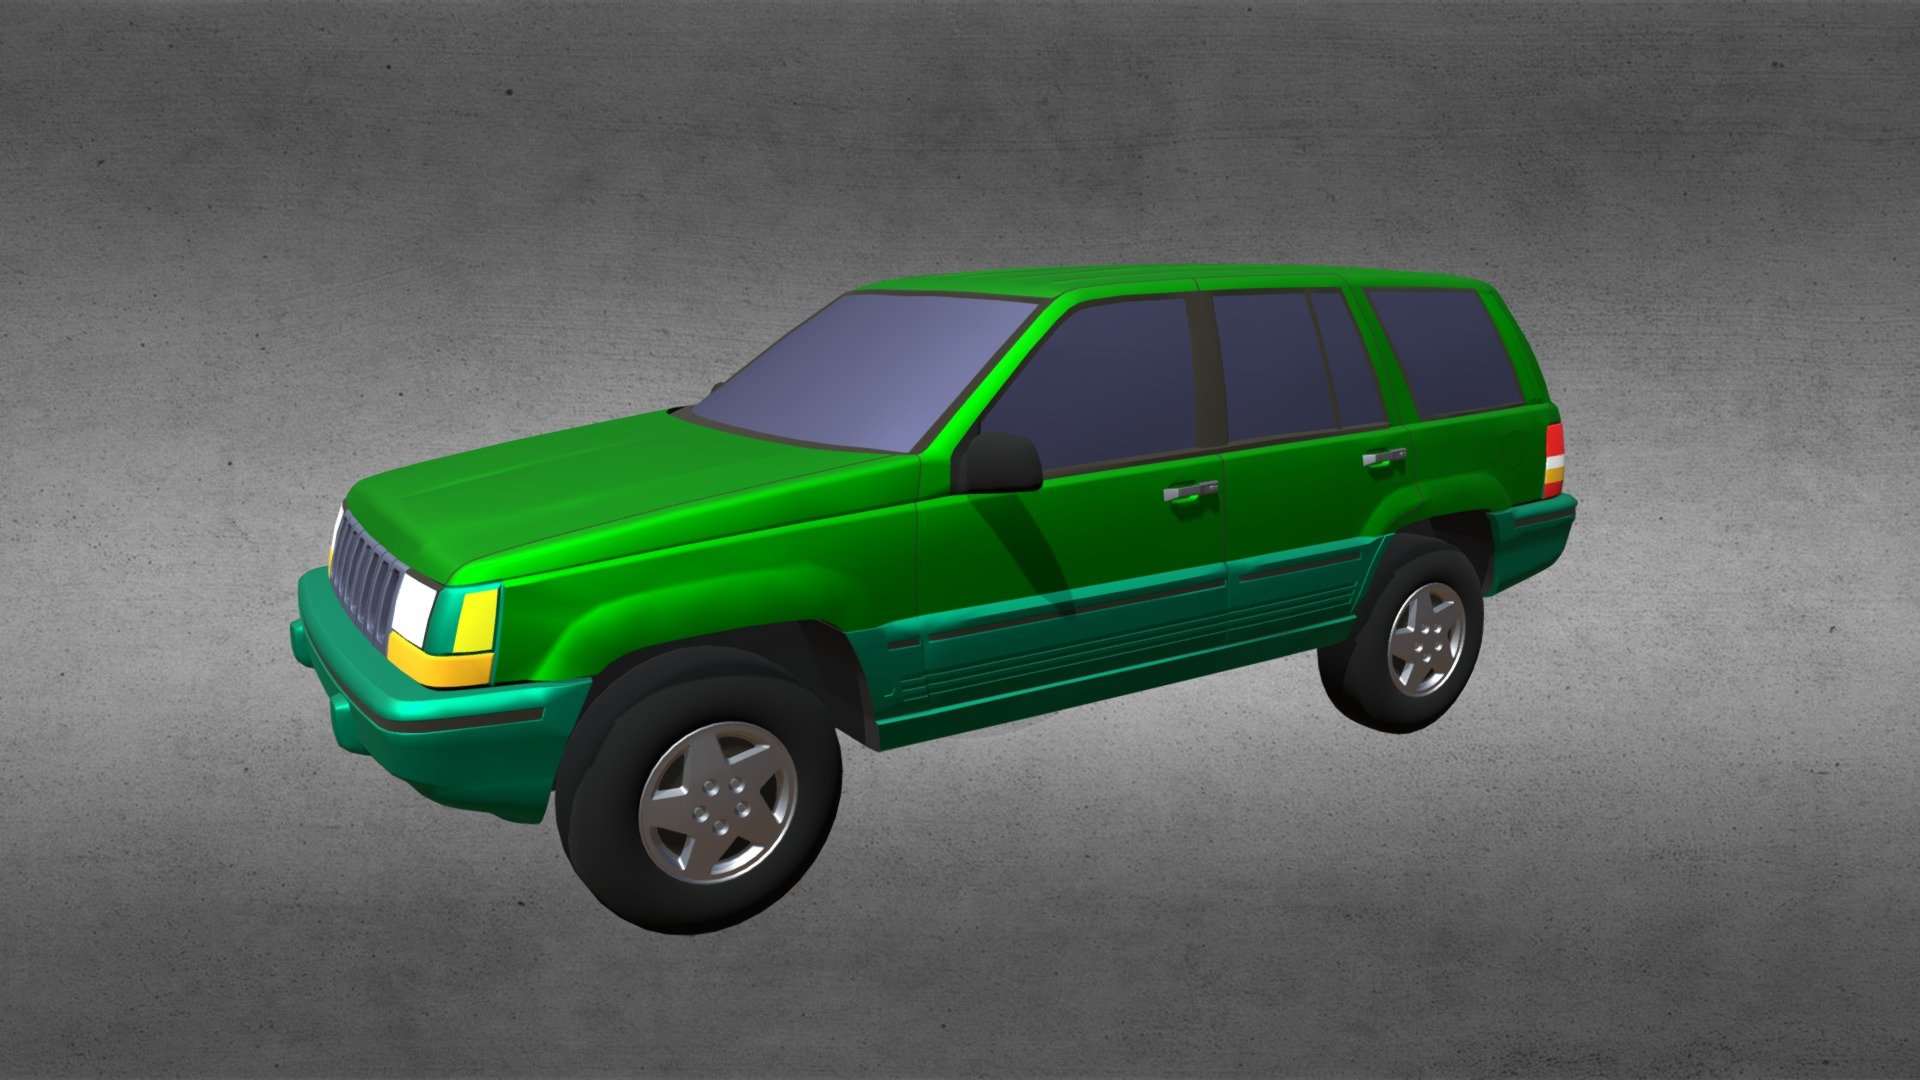 The Jeep Grand Cherokee is a mid-size SUV produced by the Jeep division of American manufacturer Chrysler Corporation. 

This digital model is based on the 1994 version of the Jeep Grand Cherokee.

Product Features:




Approx 16624 polygons.

Digitally scanned from the actual car, which gives the digital model a highly accurate shape.

Does not have an interior cabin, so we recommend darkening the windows.

The wheels, doors, hood, and trunk are separate groups, which your software should read as separate parts.

This version includes an mtl file, which your software program should read to colorize the model.

The model is UV mapped and NO textures are included.

Original model by Digimation and sold here with permission 3d model